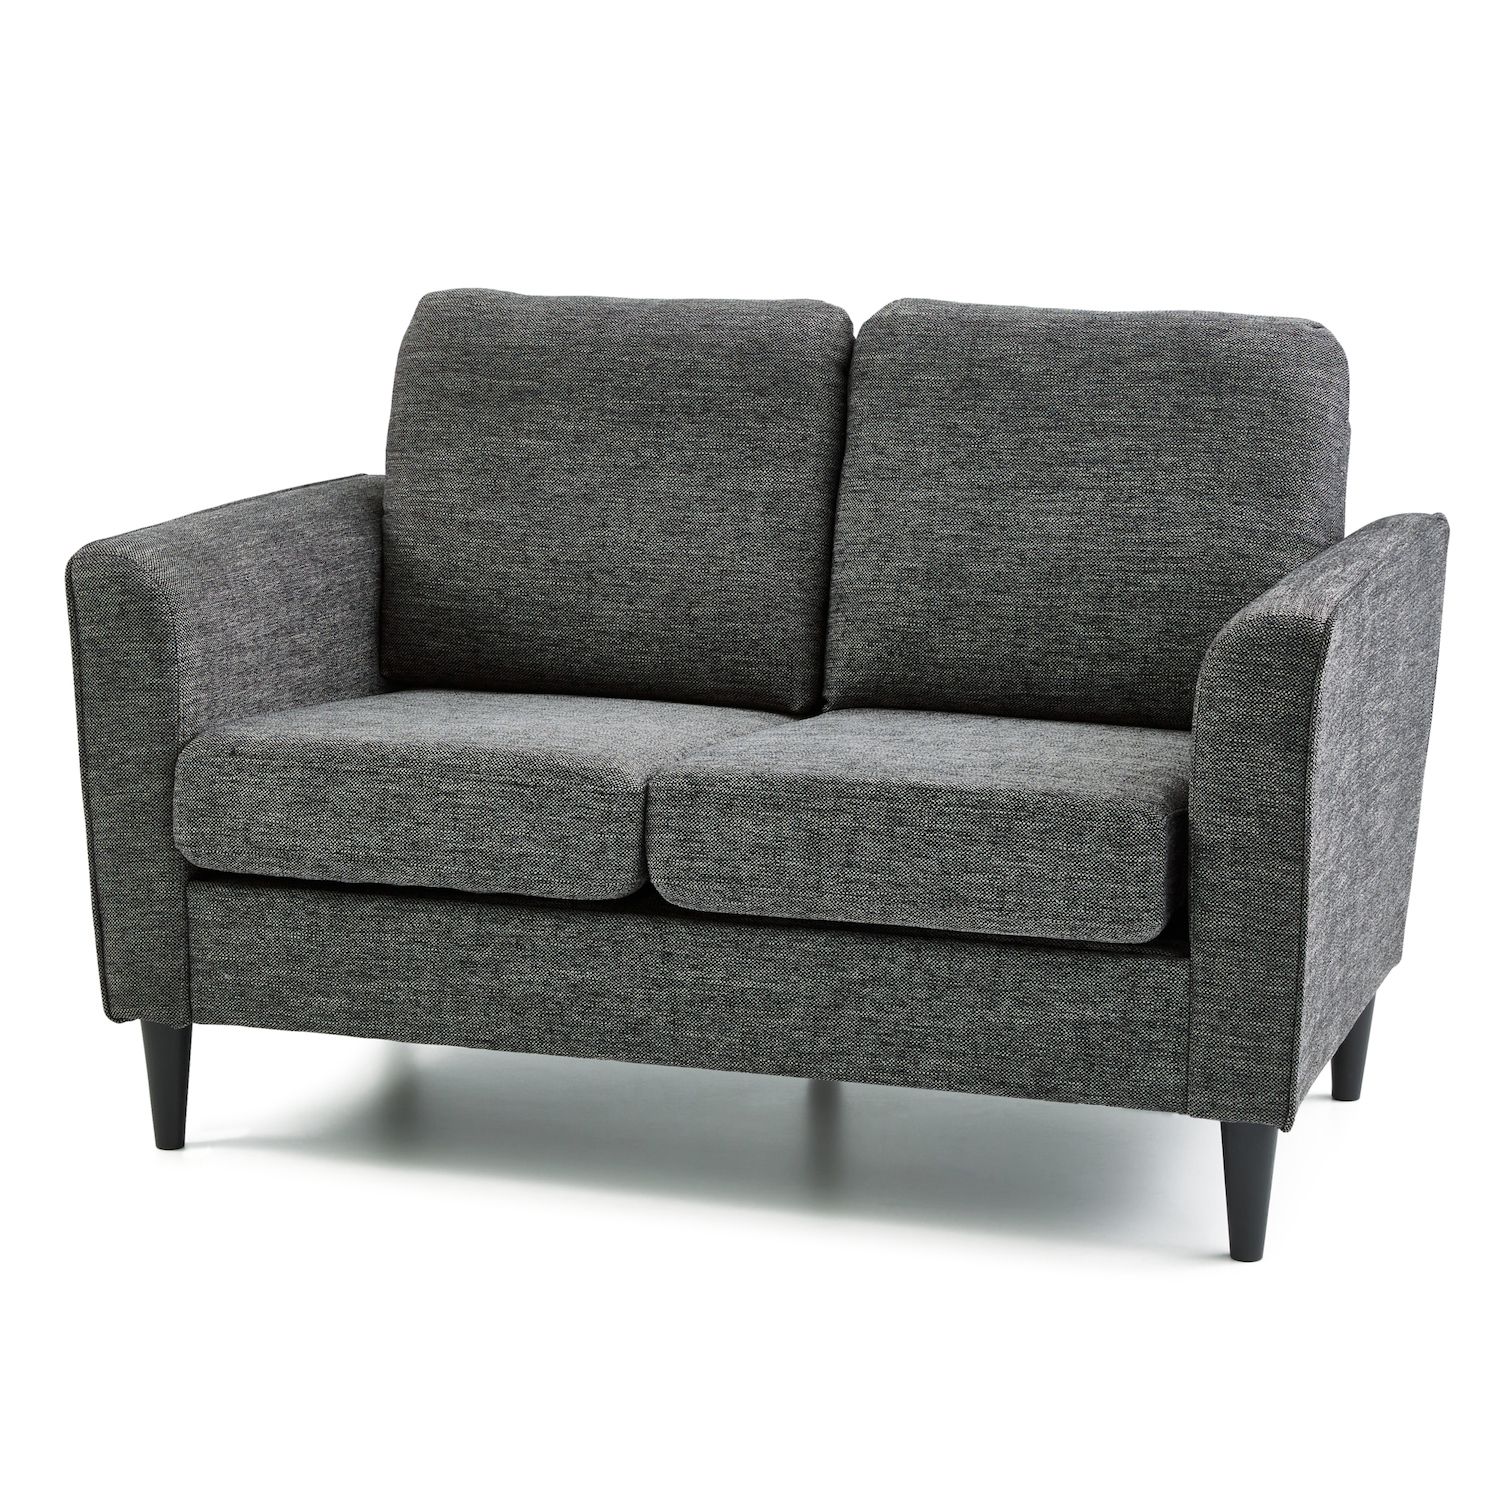 Image for Dream Collection Lucid Curved Arm Loveseat at Kohl's.